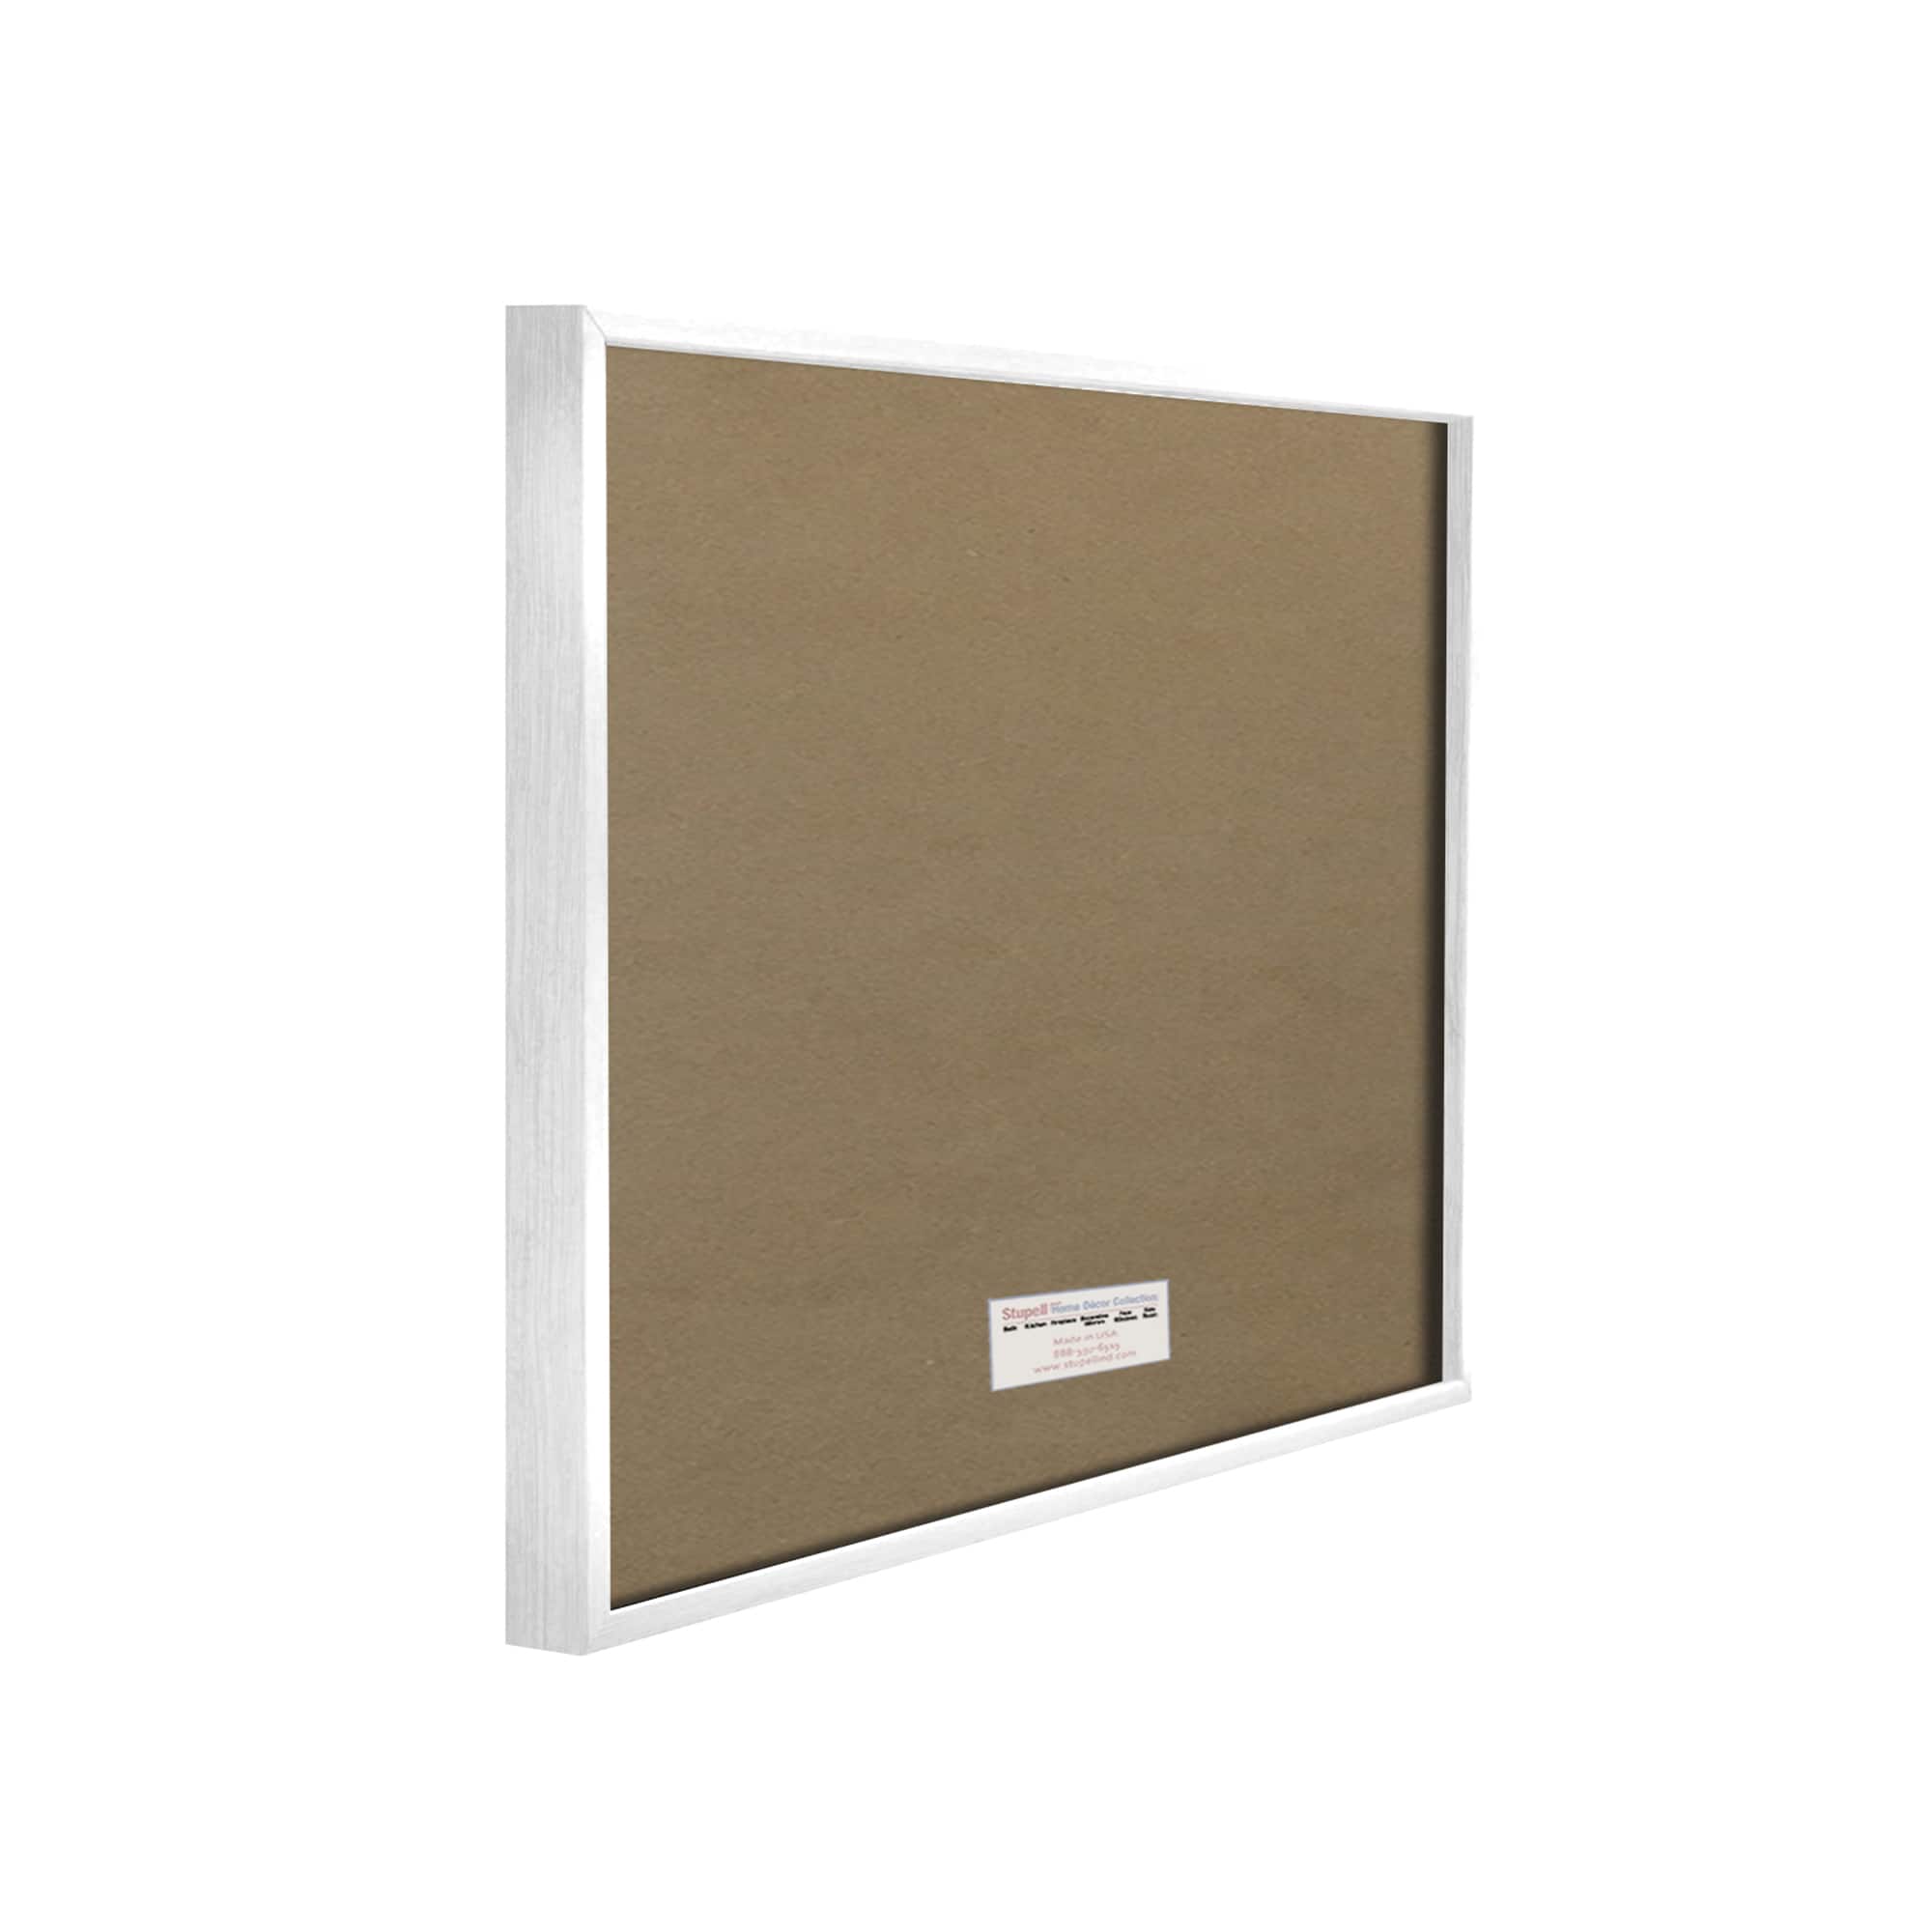 Stupell Industries Glam Designer Accessories Books Detail Wall Accent with White Frame